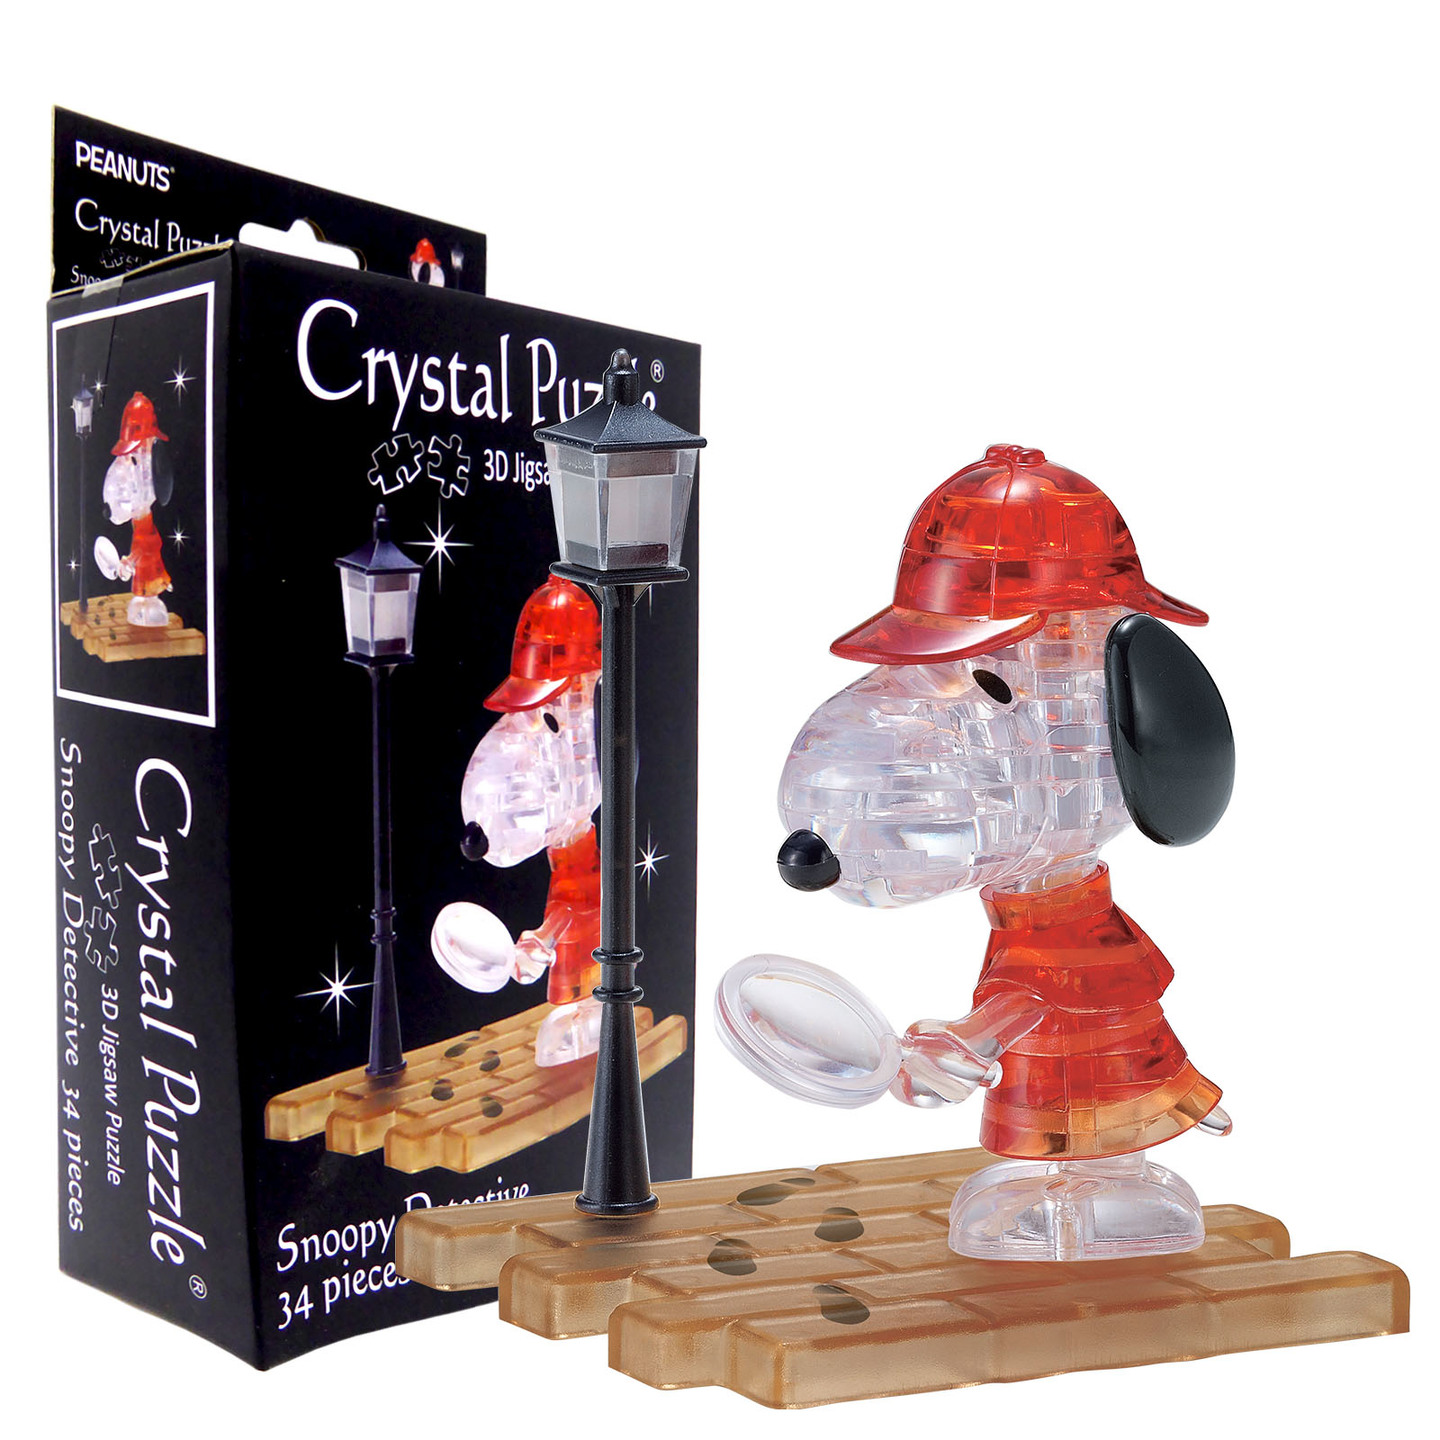 3D Crystal Puzzle Snoopy Detective